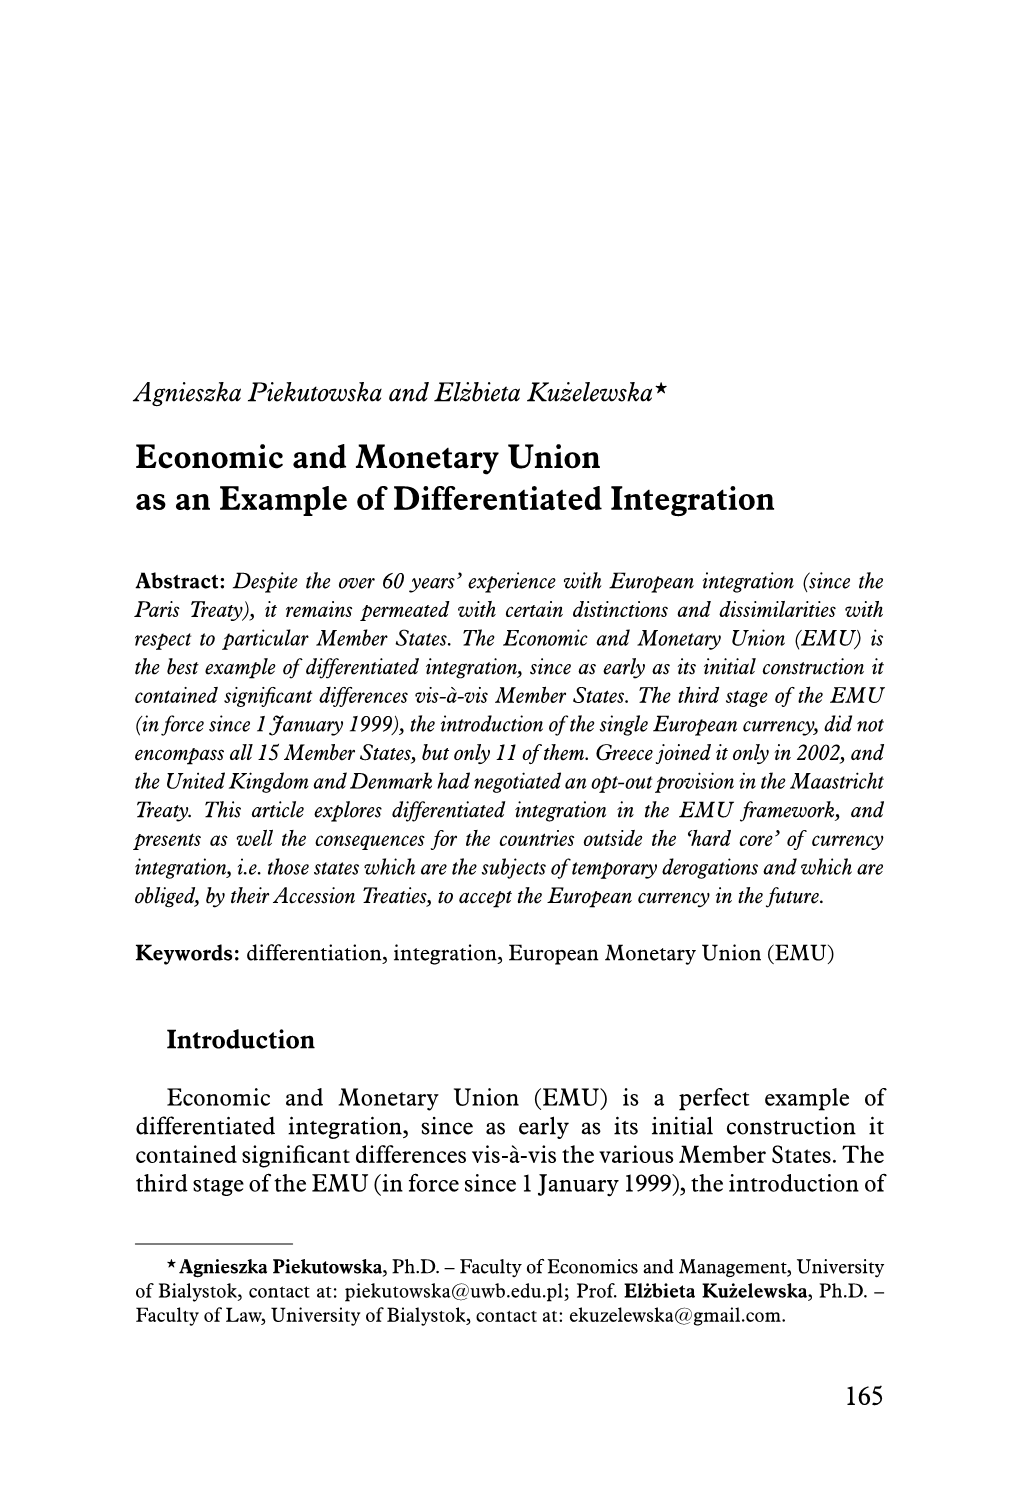 Economic and Monetary Union As an Example of Differentiated Integration